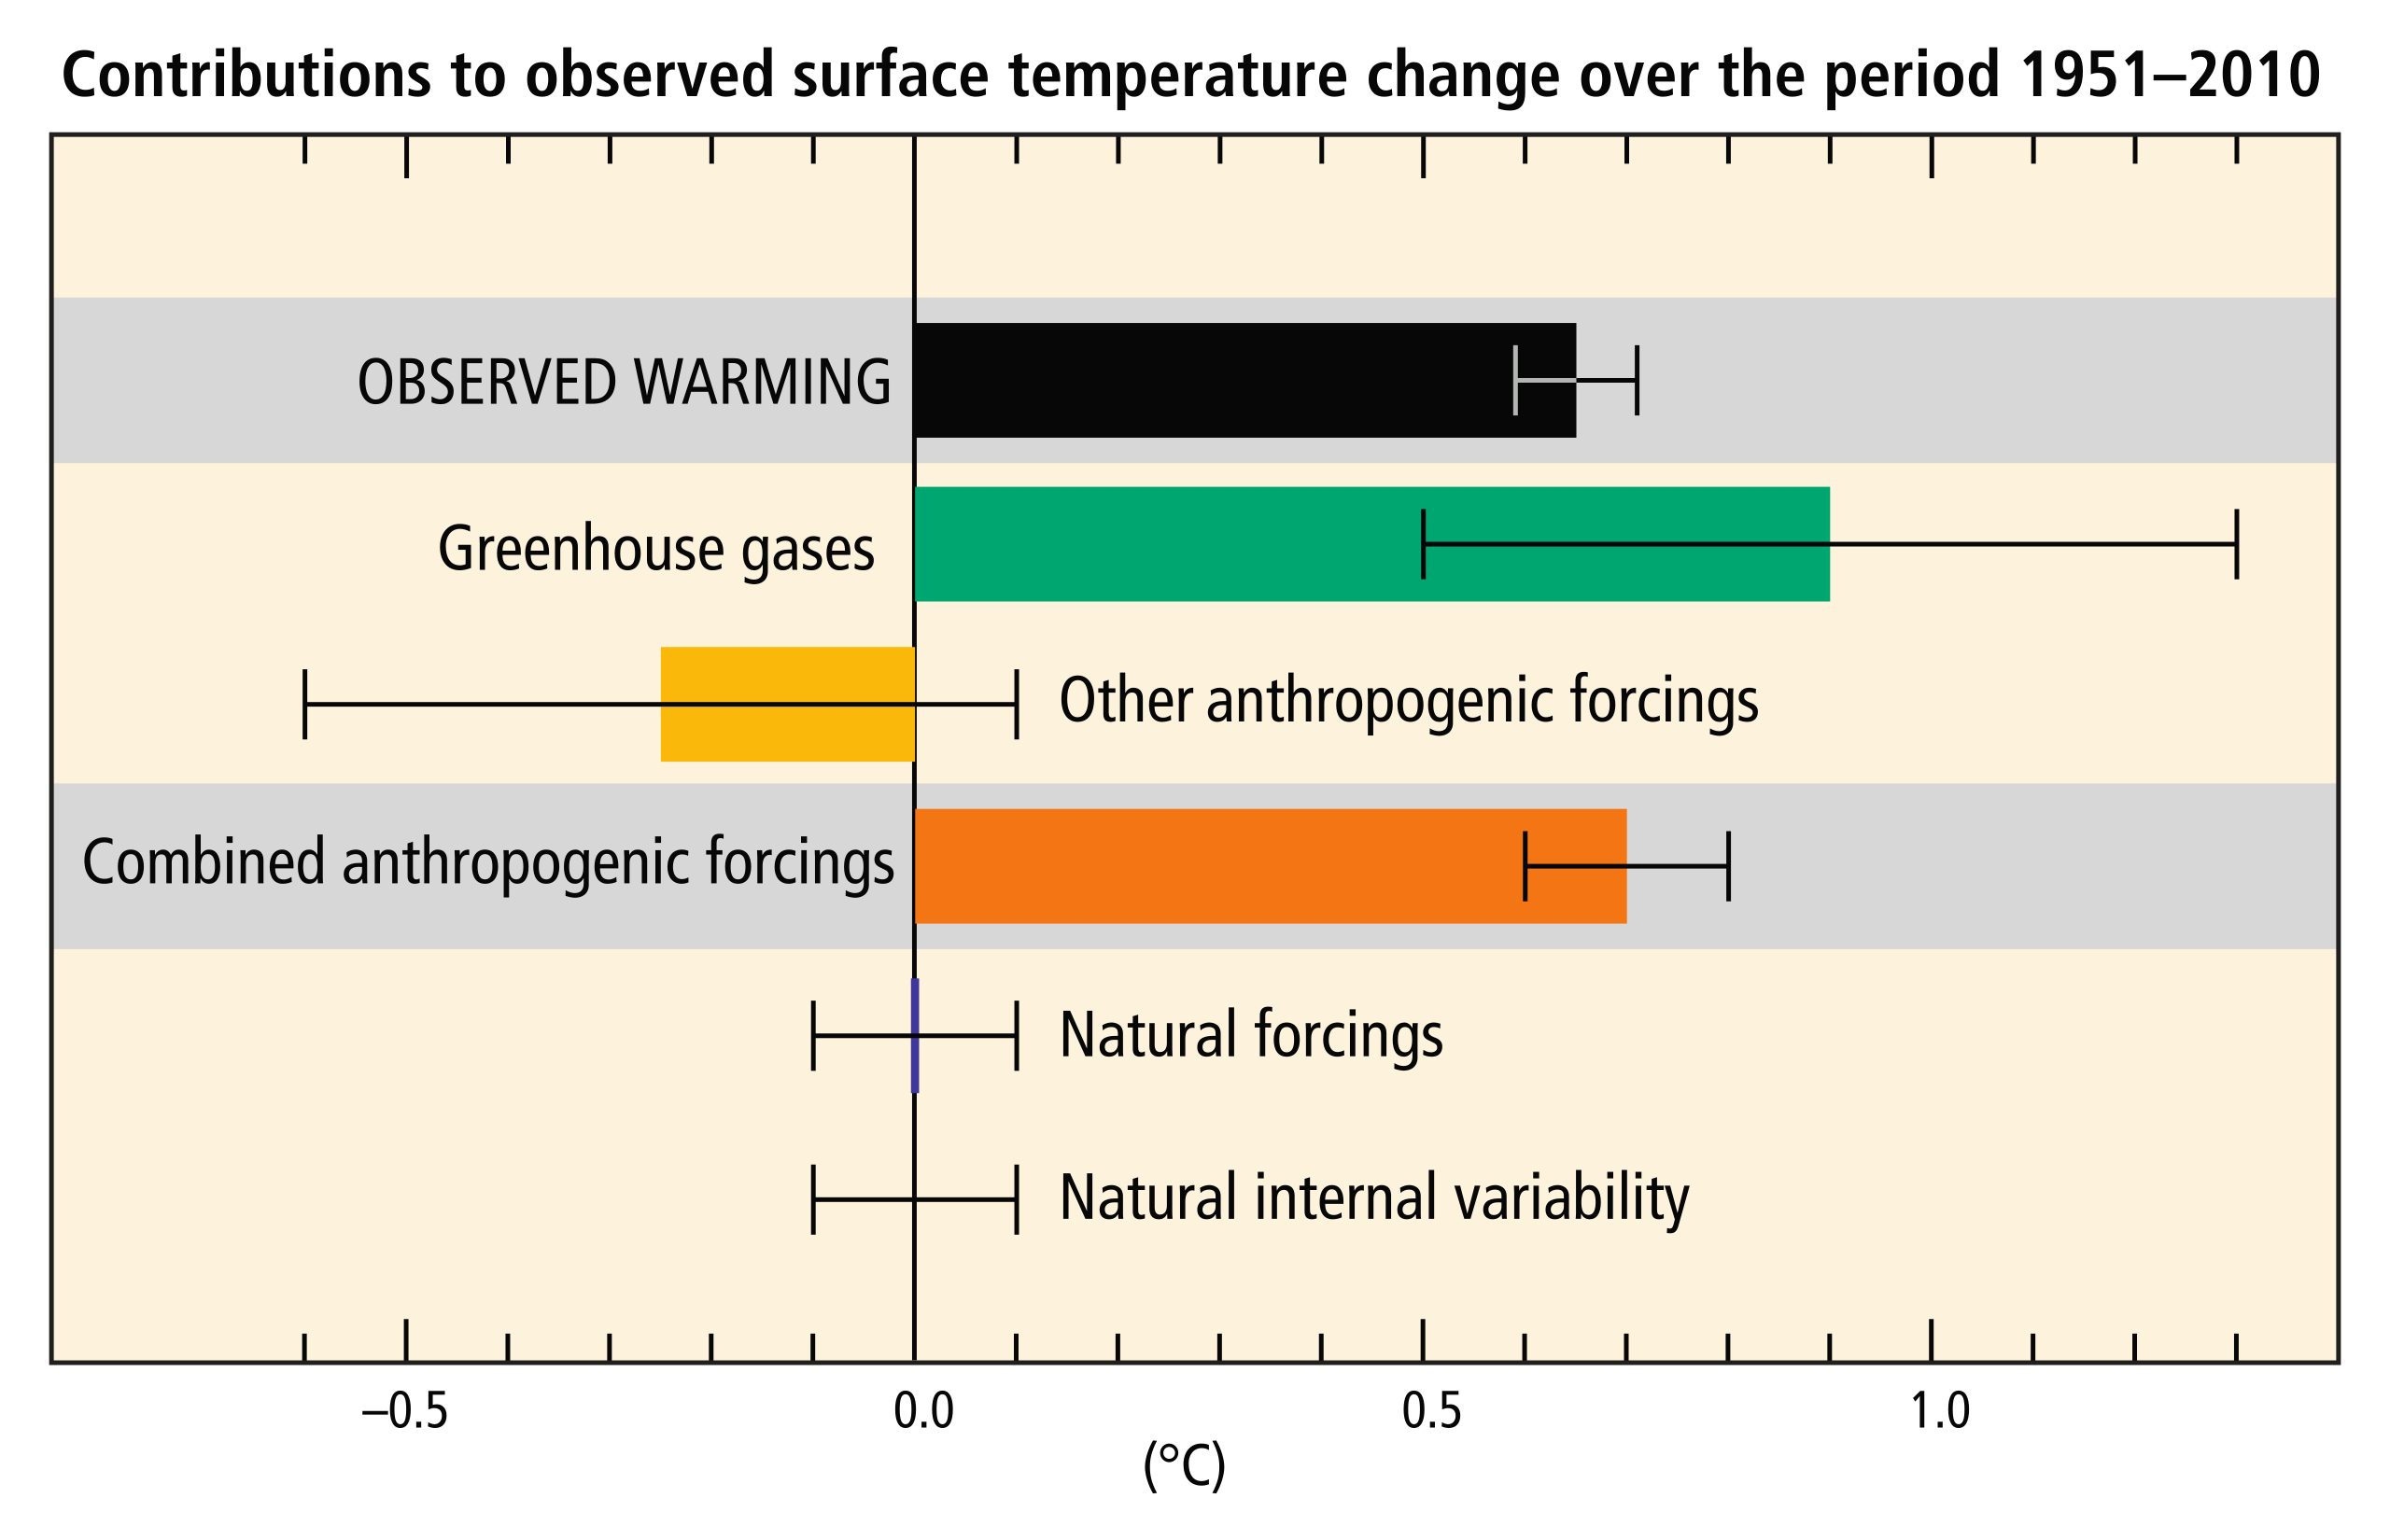 Graph shows that anthropogenic greenhouse gases have a much larger influence on temperature than other factors such as natural changes.